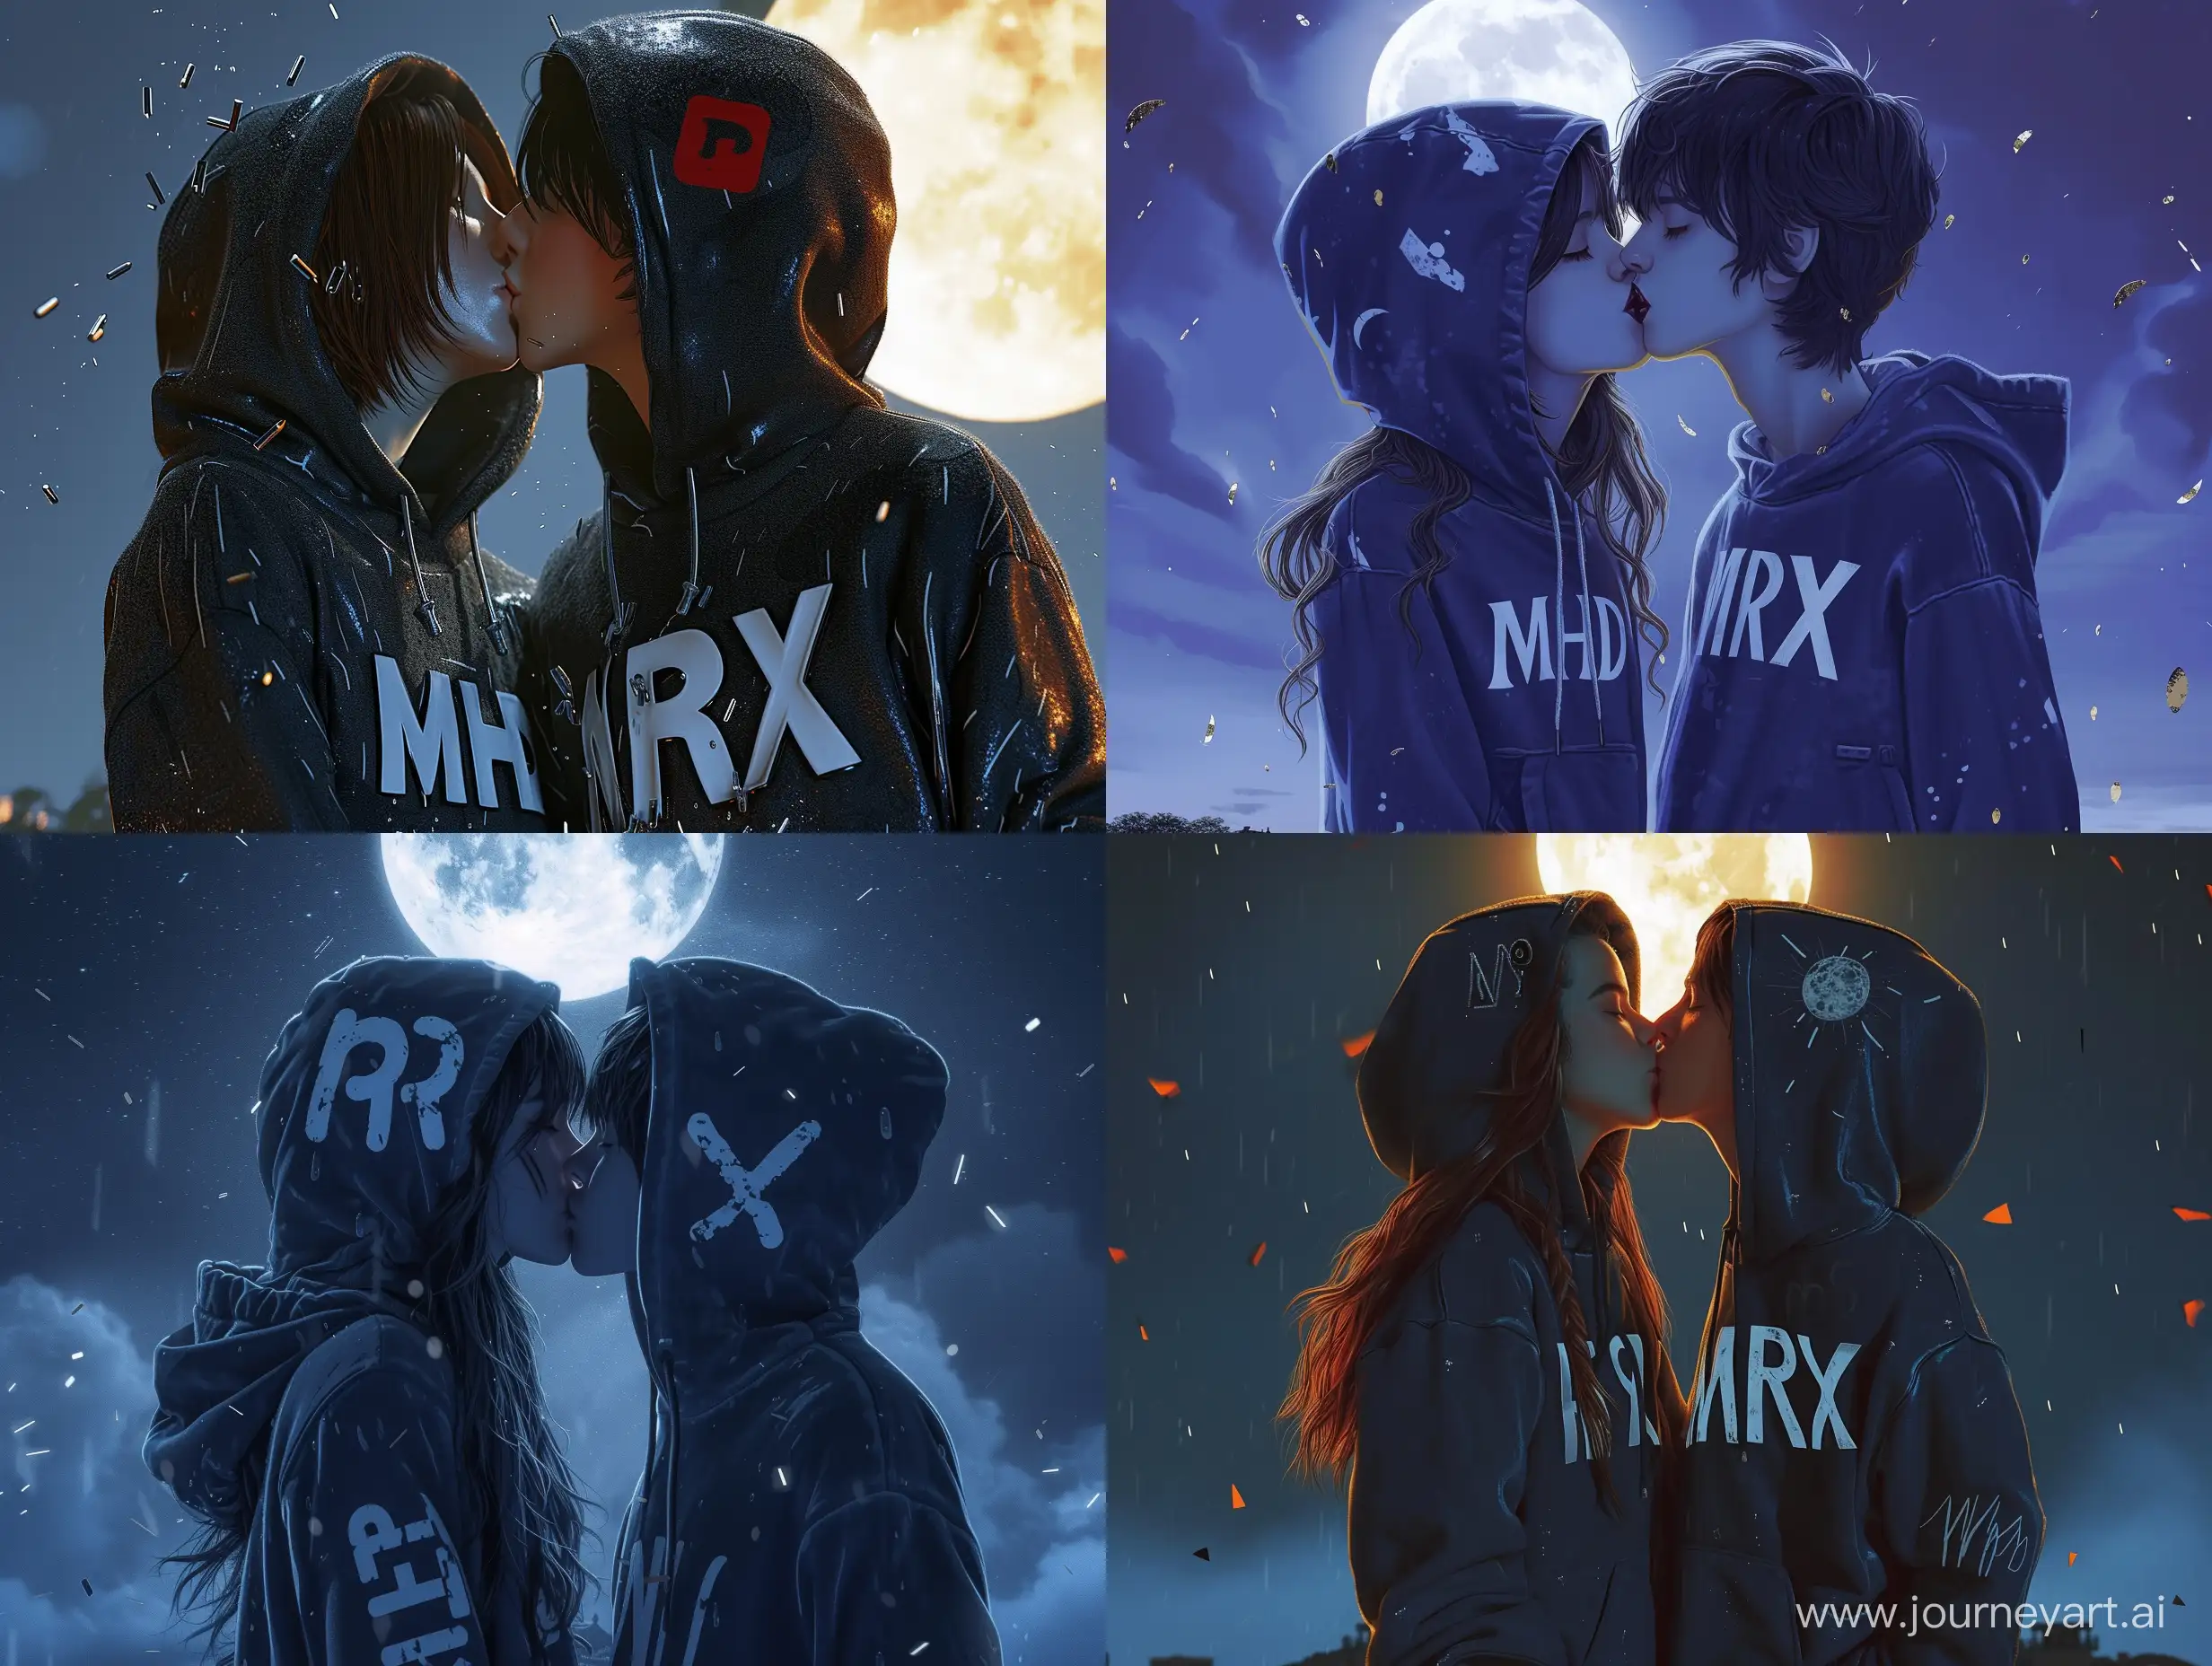 create a photo, girl has "MRX" letter on her hoody and boy has "MHD" letter on his hoody are kissing, night, moon, falling stars, ultra high detailed photo, modern, realistic, full body pose,